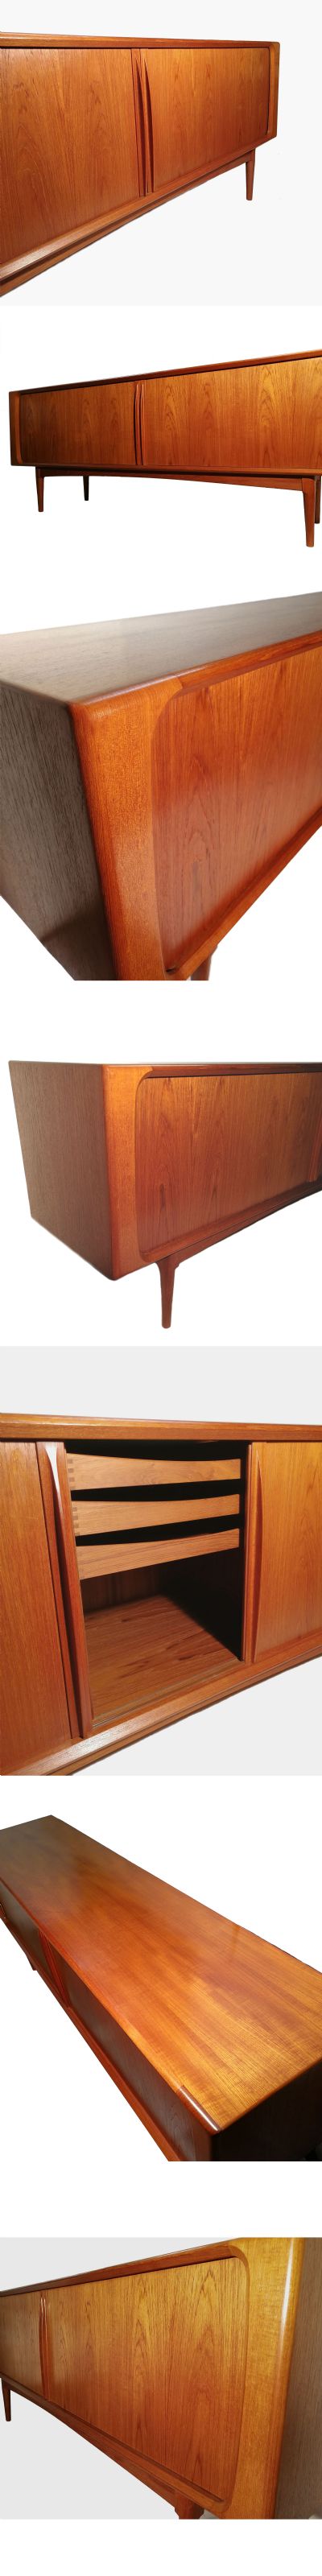 An original issue number 142 tambour door sideboard in Teak. Manufactured by Bernhard Pedersen & Son, c1960s. With centre drawers section and adjustable shelf to each side